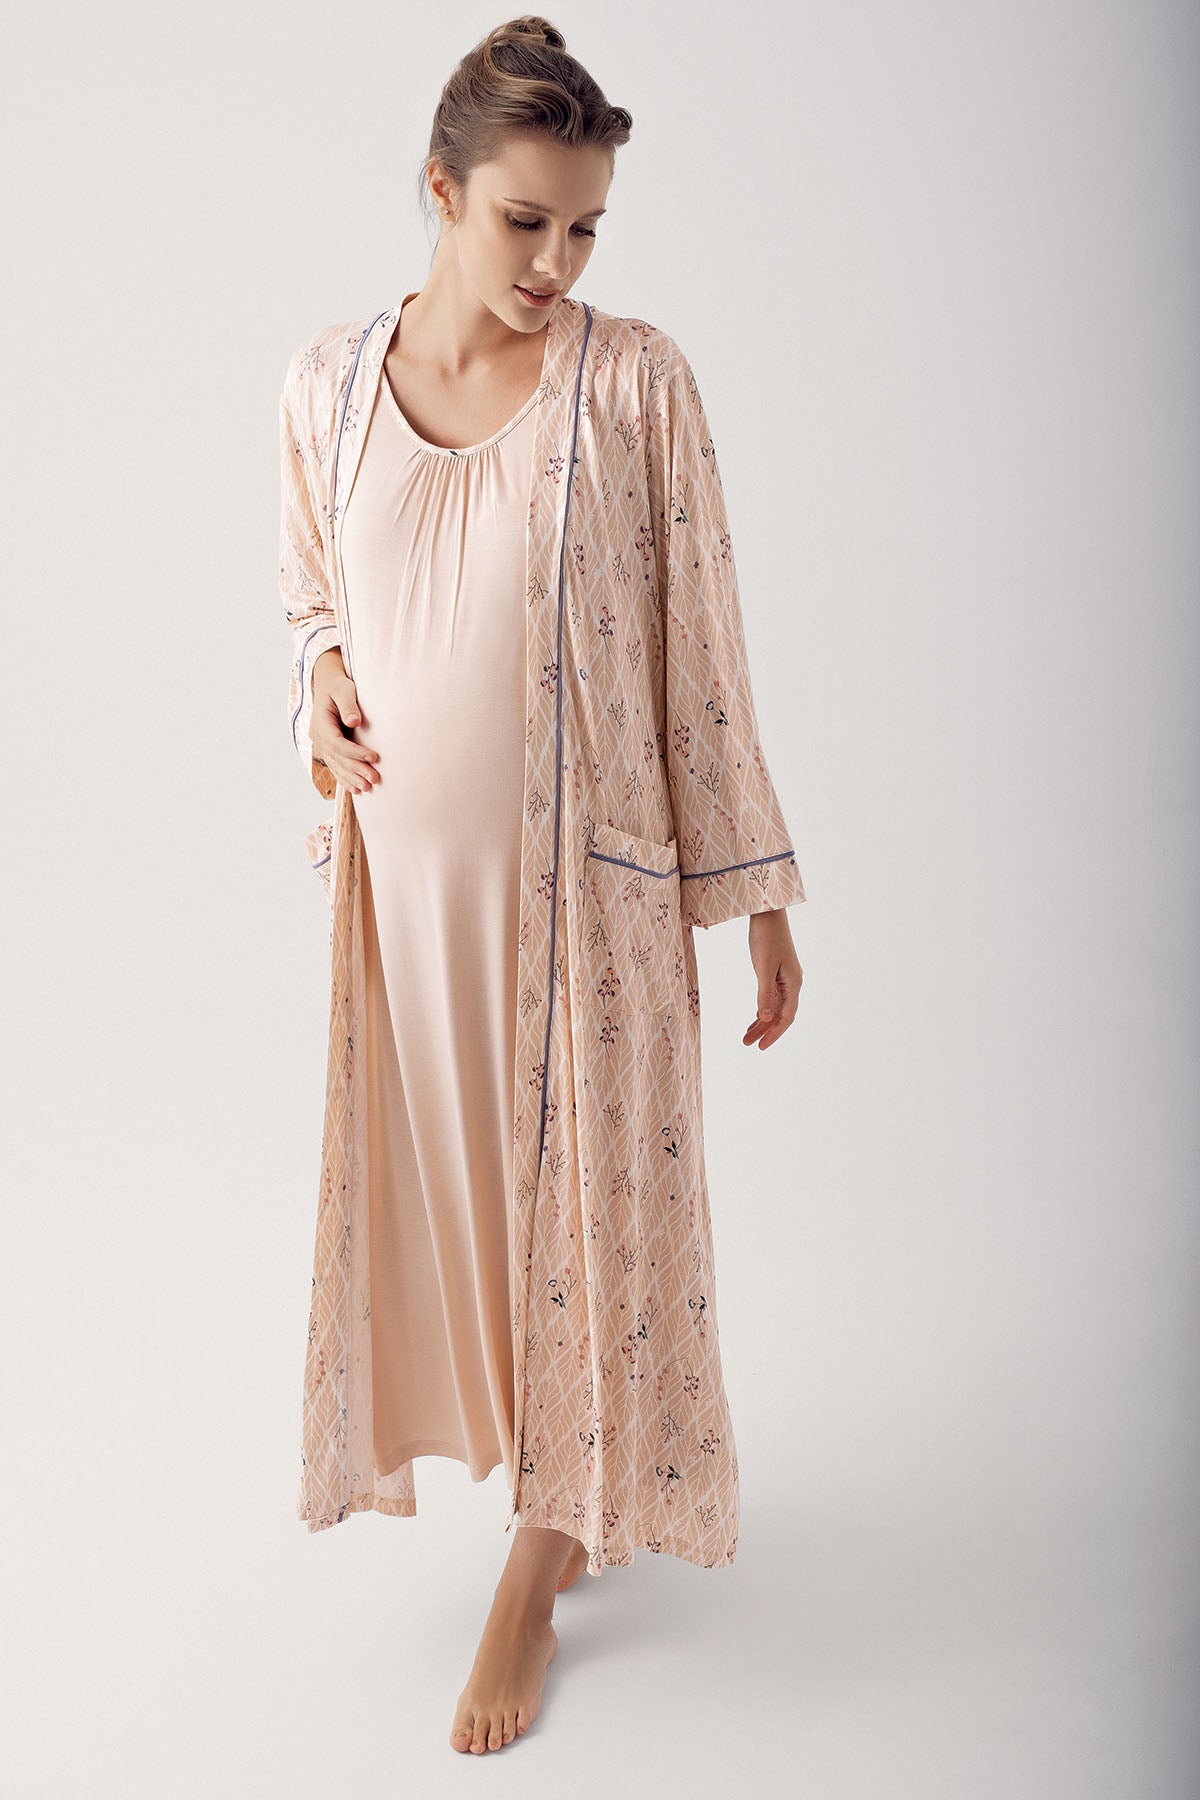 Shopymommy 14404 Breastfeeding Detailed Maternity & Nursing Nightgown With Patterned Robe Beige